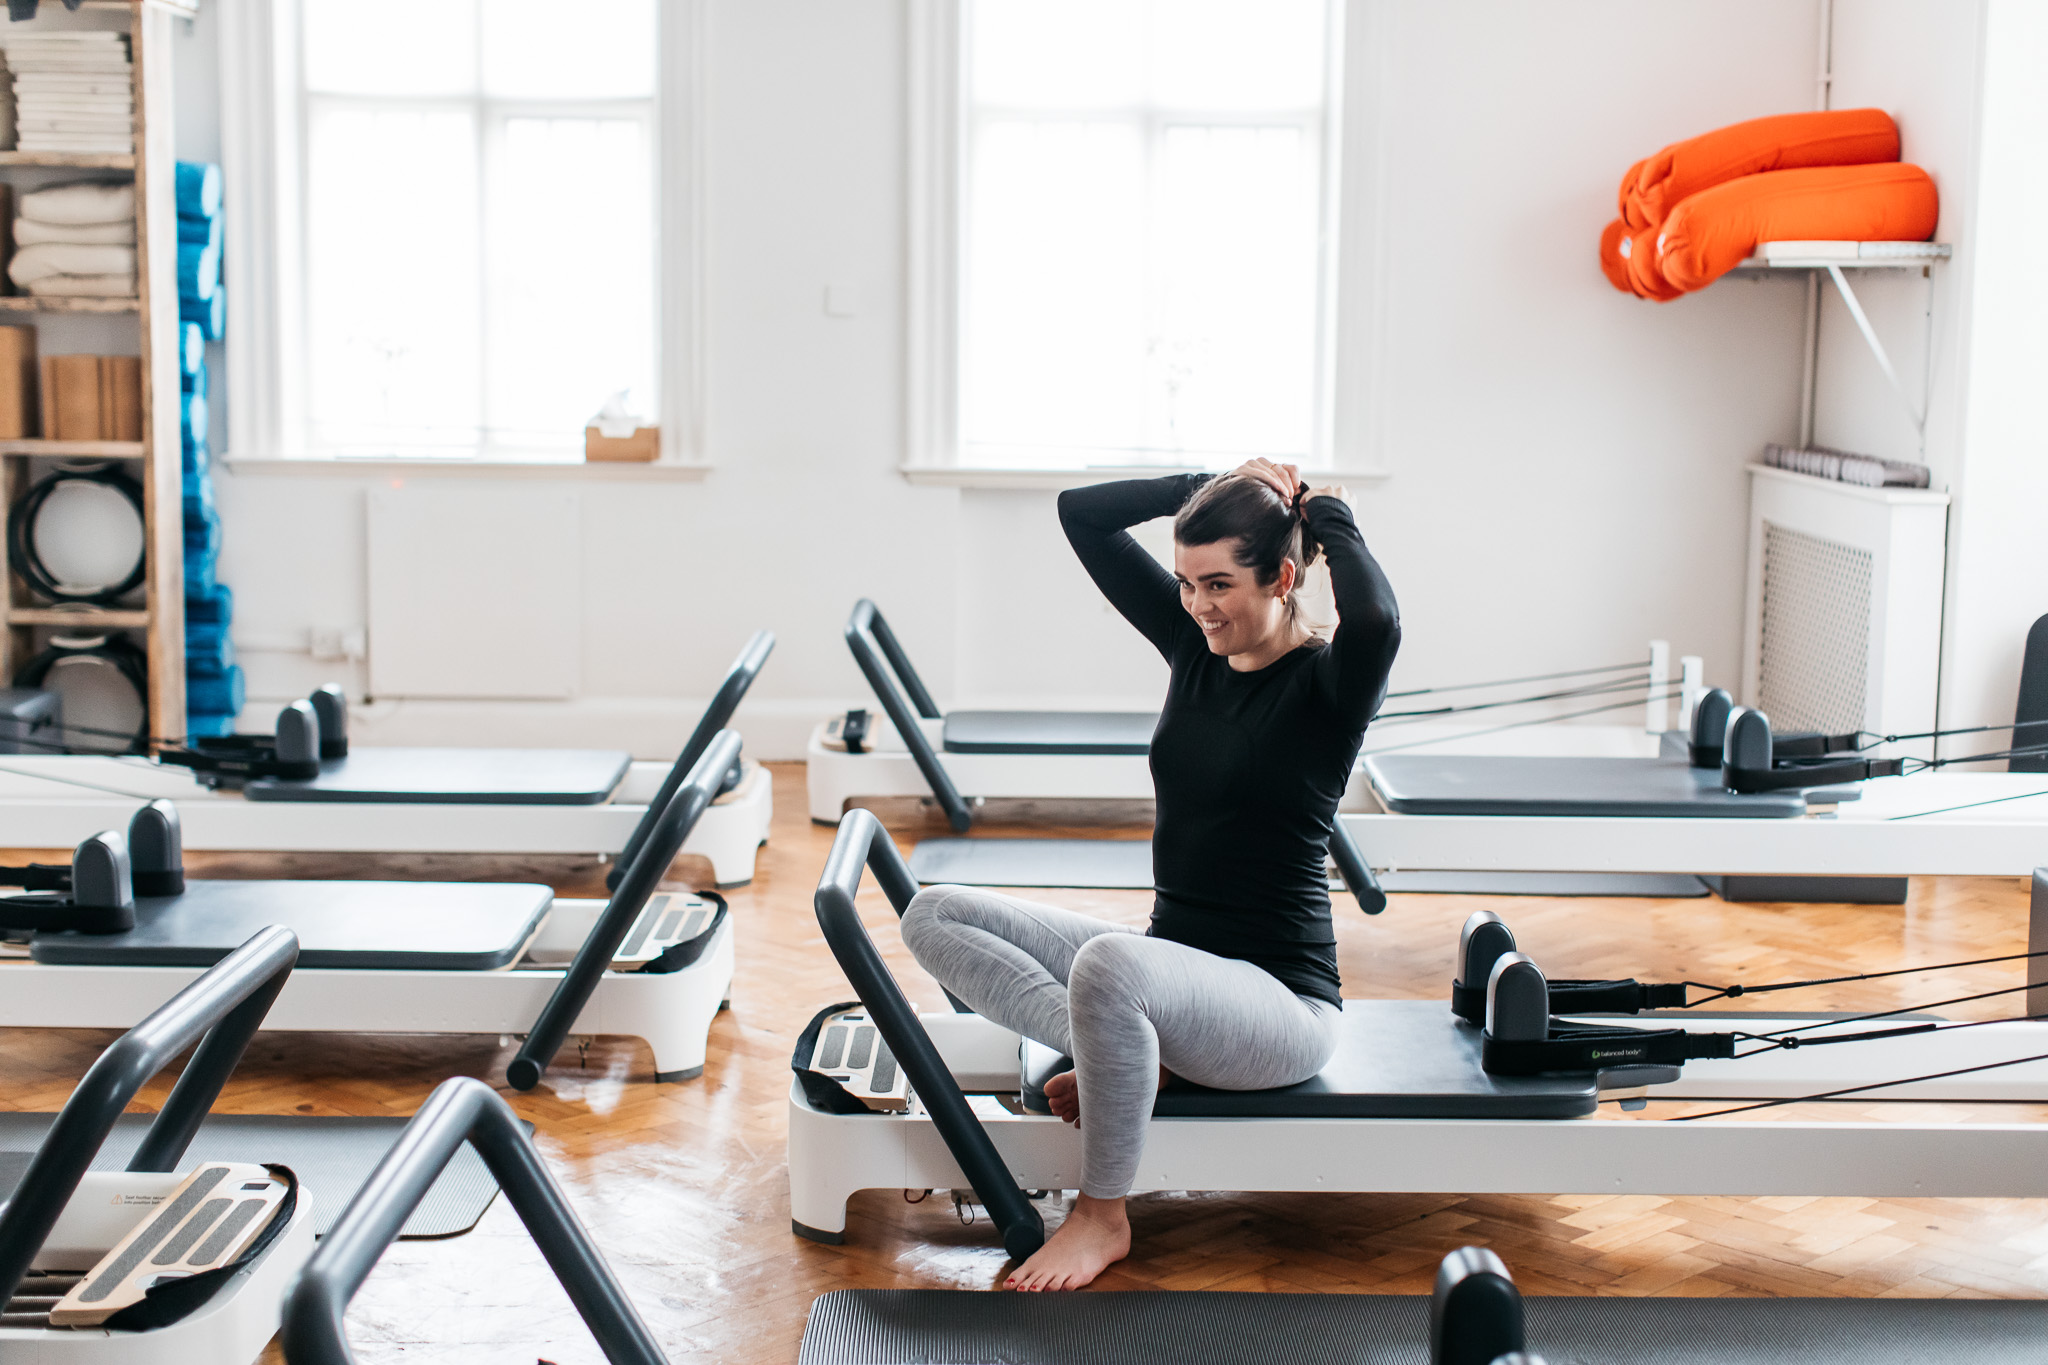 How to Do Reformer Pilates at Home Without a Reformer